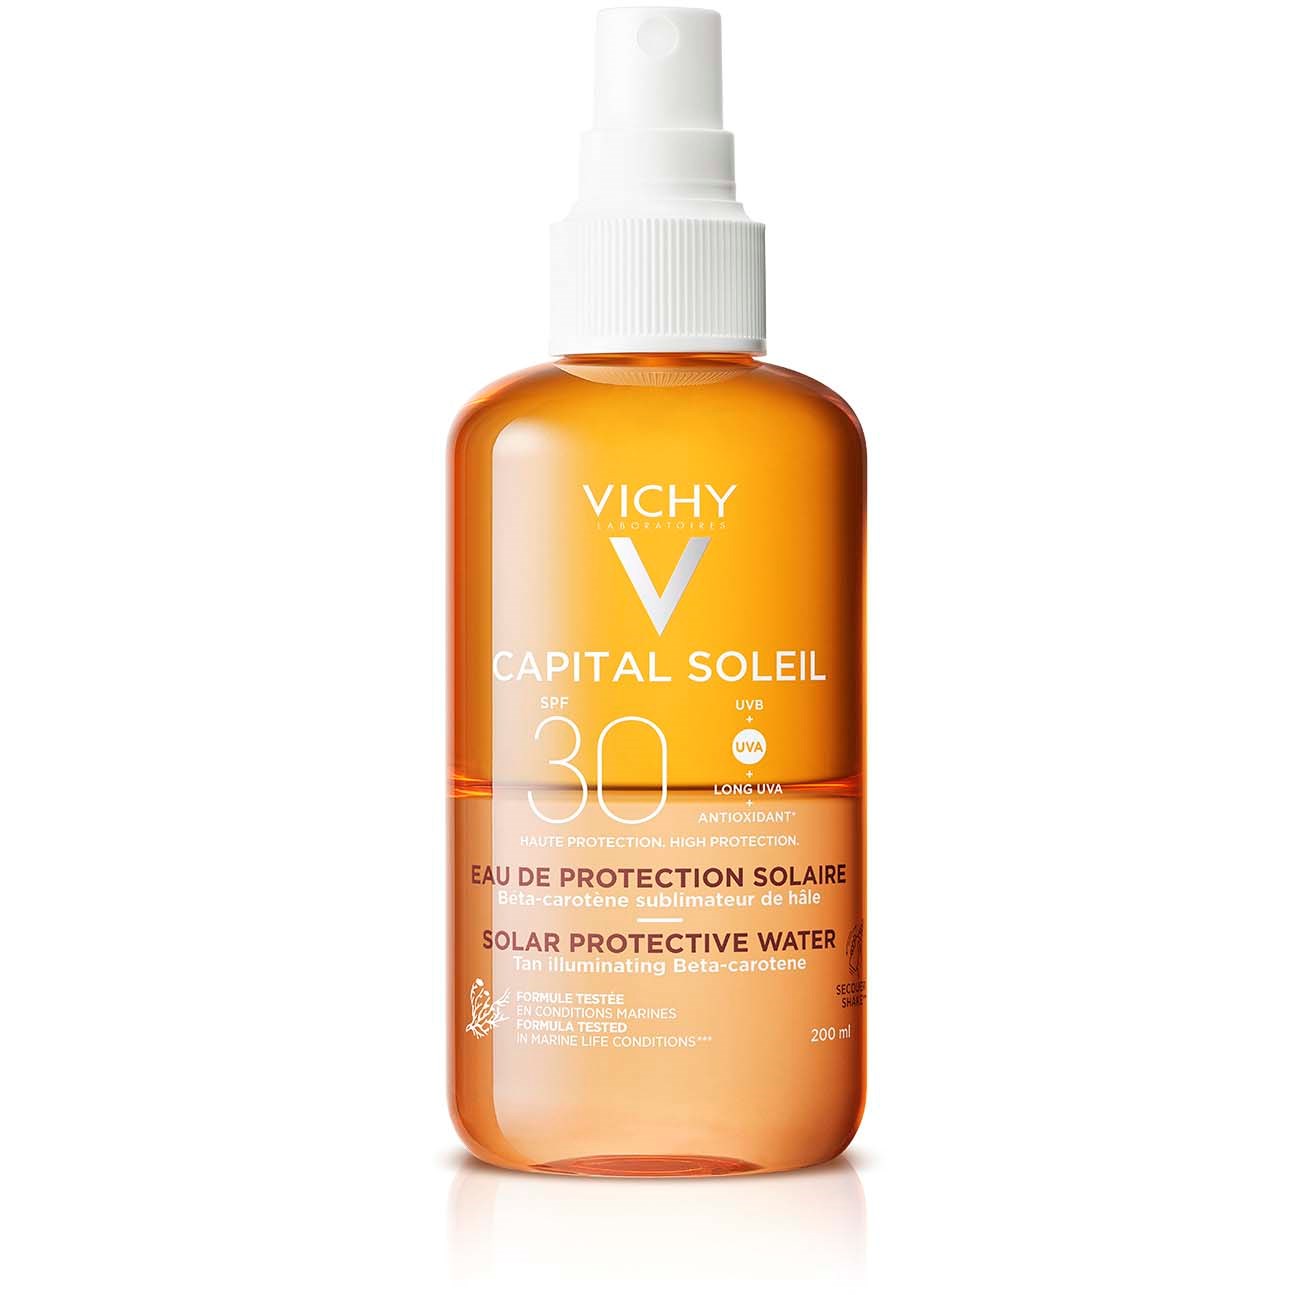 VICHY Capital Soleil Tan Beautifying Solar Protective Water SPF30 200